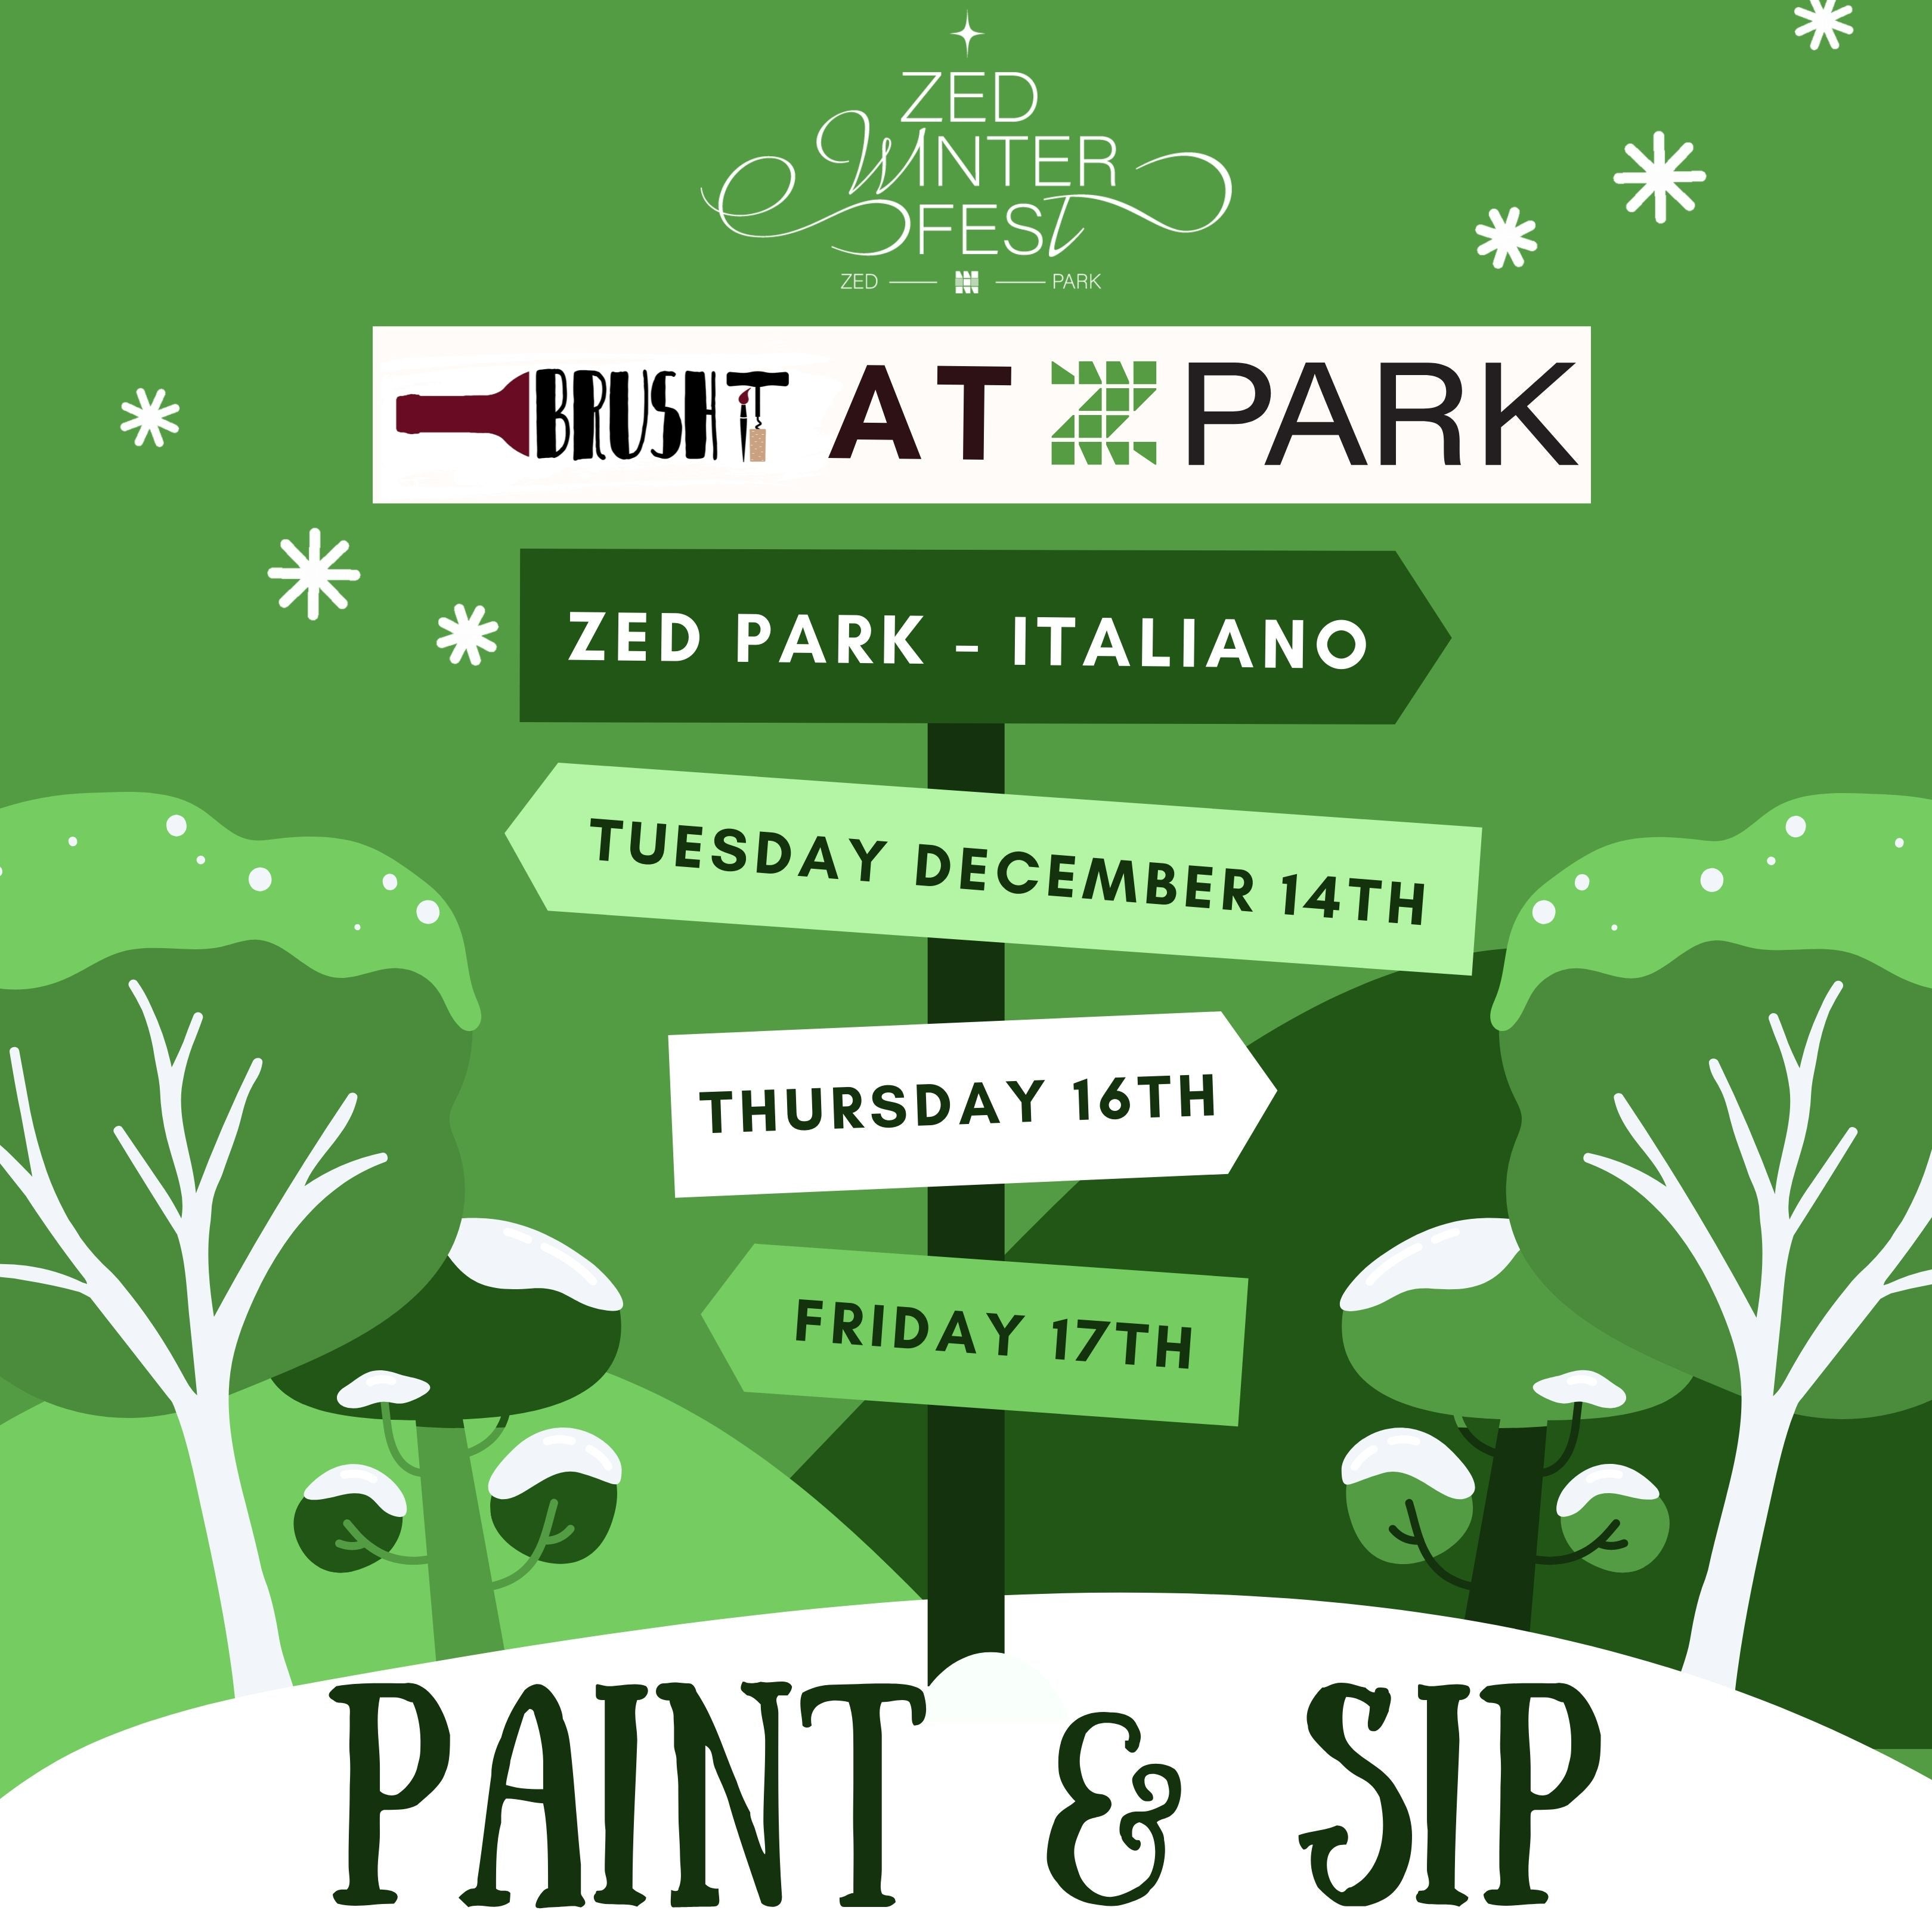 TUESDAY, December 14th - 7:00 pm - 9:00 pm - ITALIANO - ZED PARK WINTER FEST